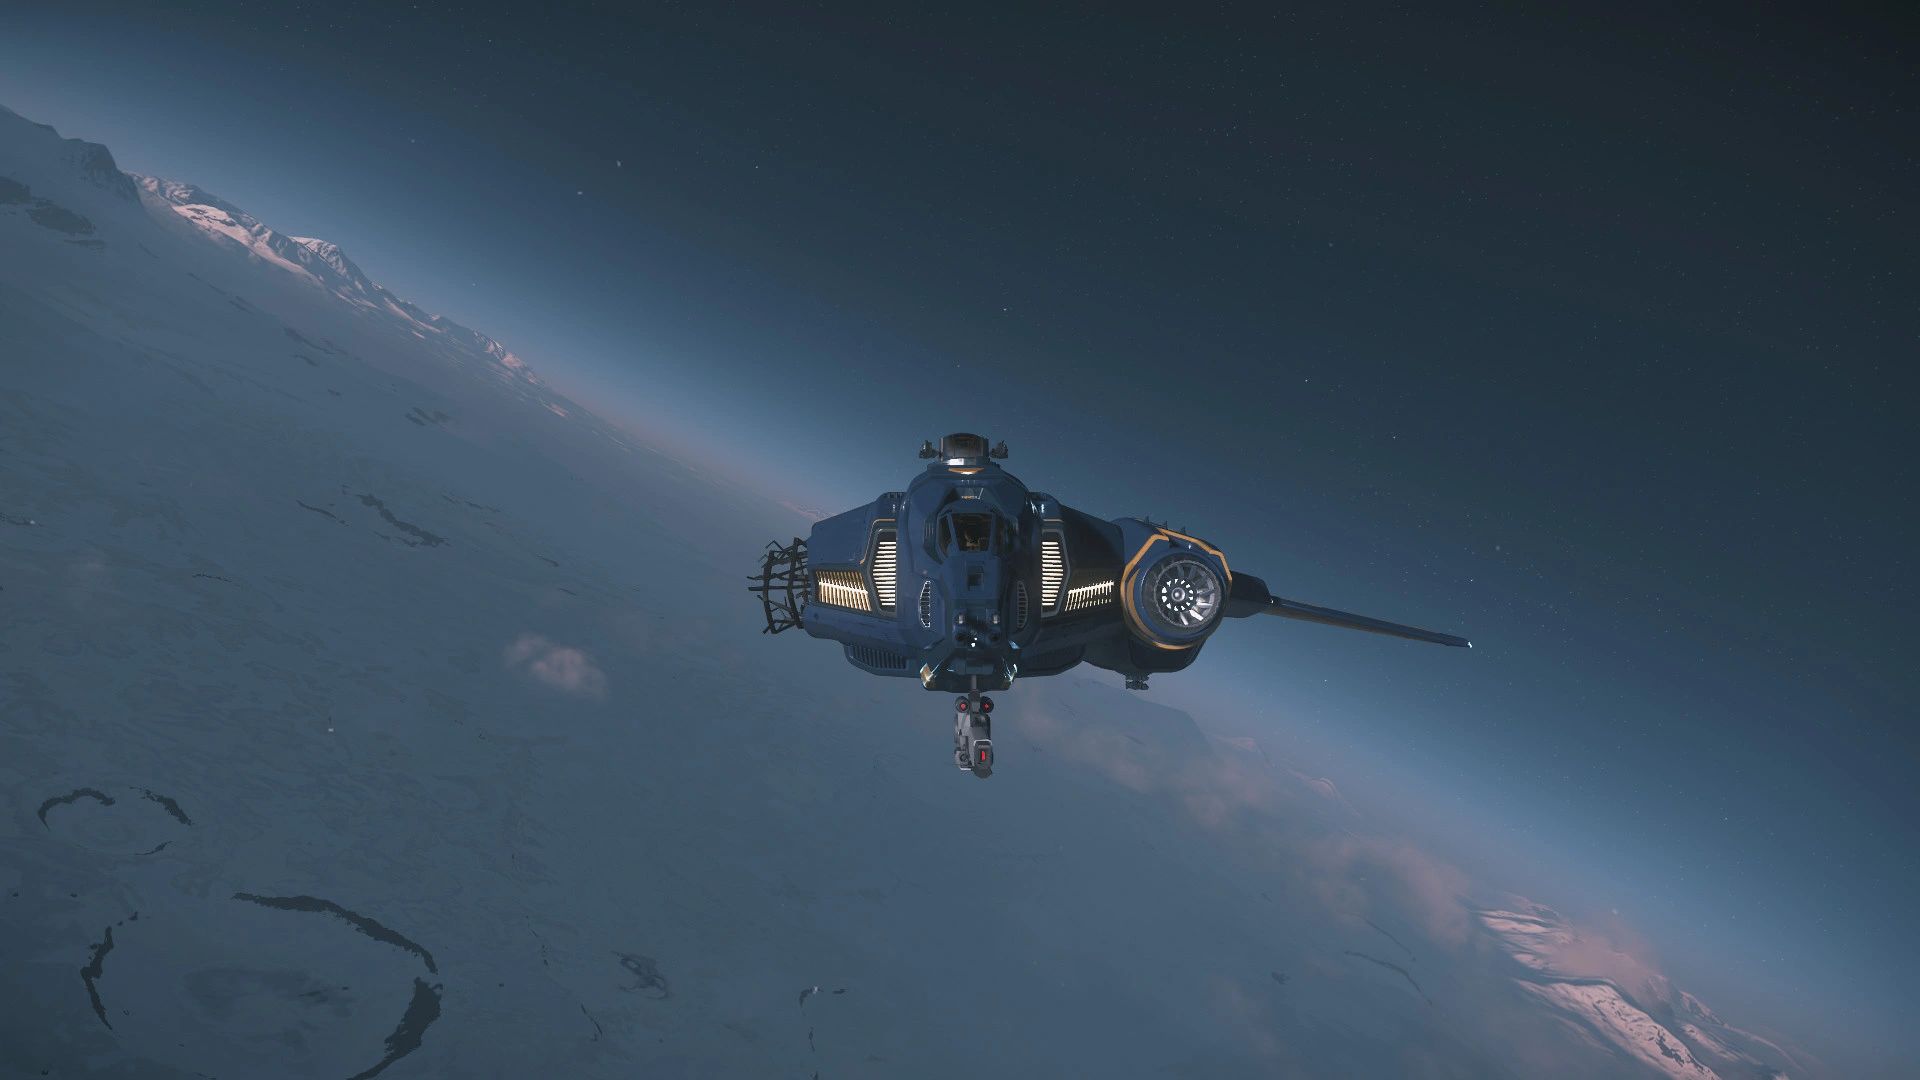 Star Citizen's Alpha 3.18 Update Leads To A Very Bad Week